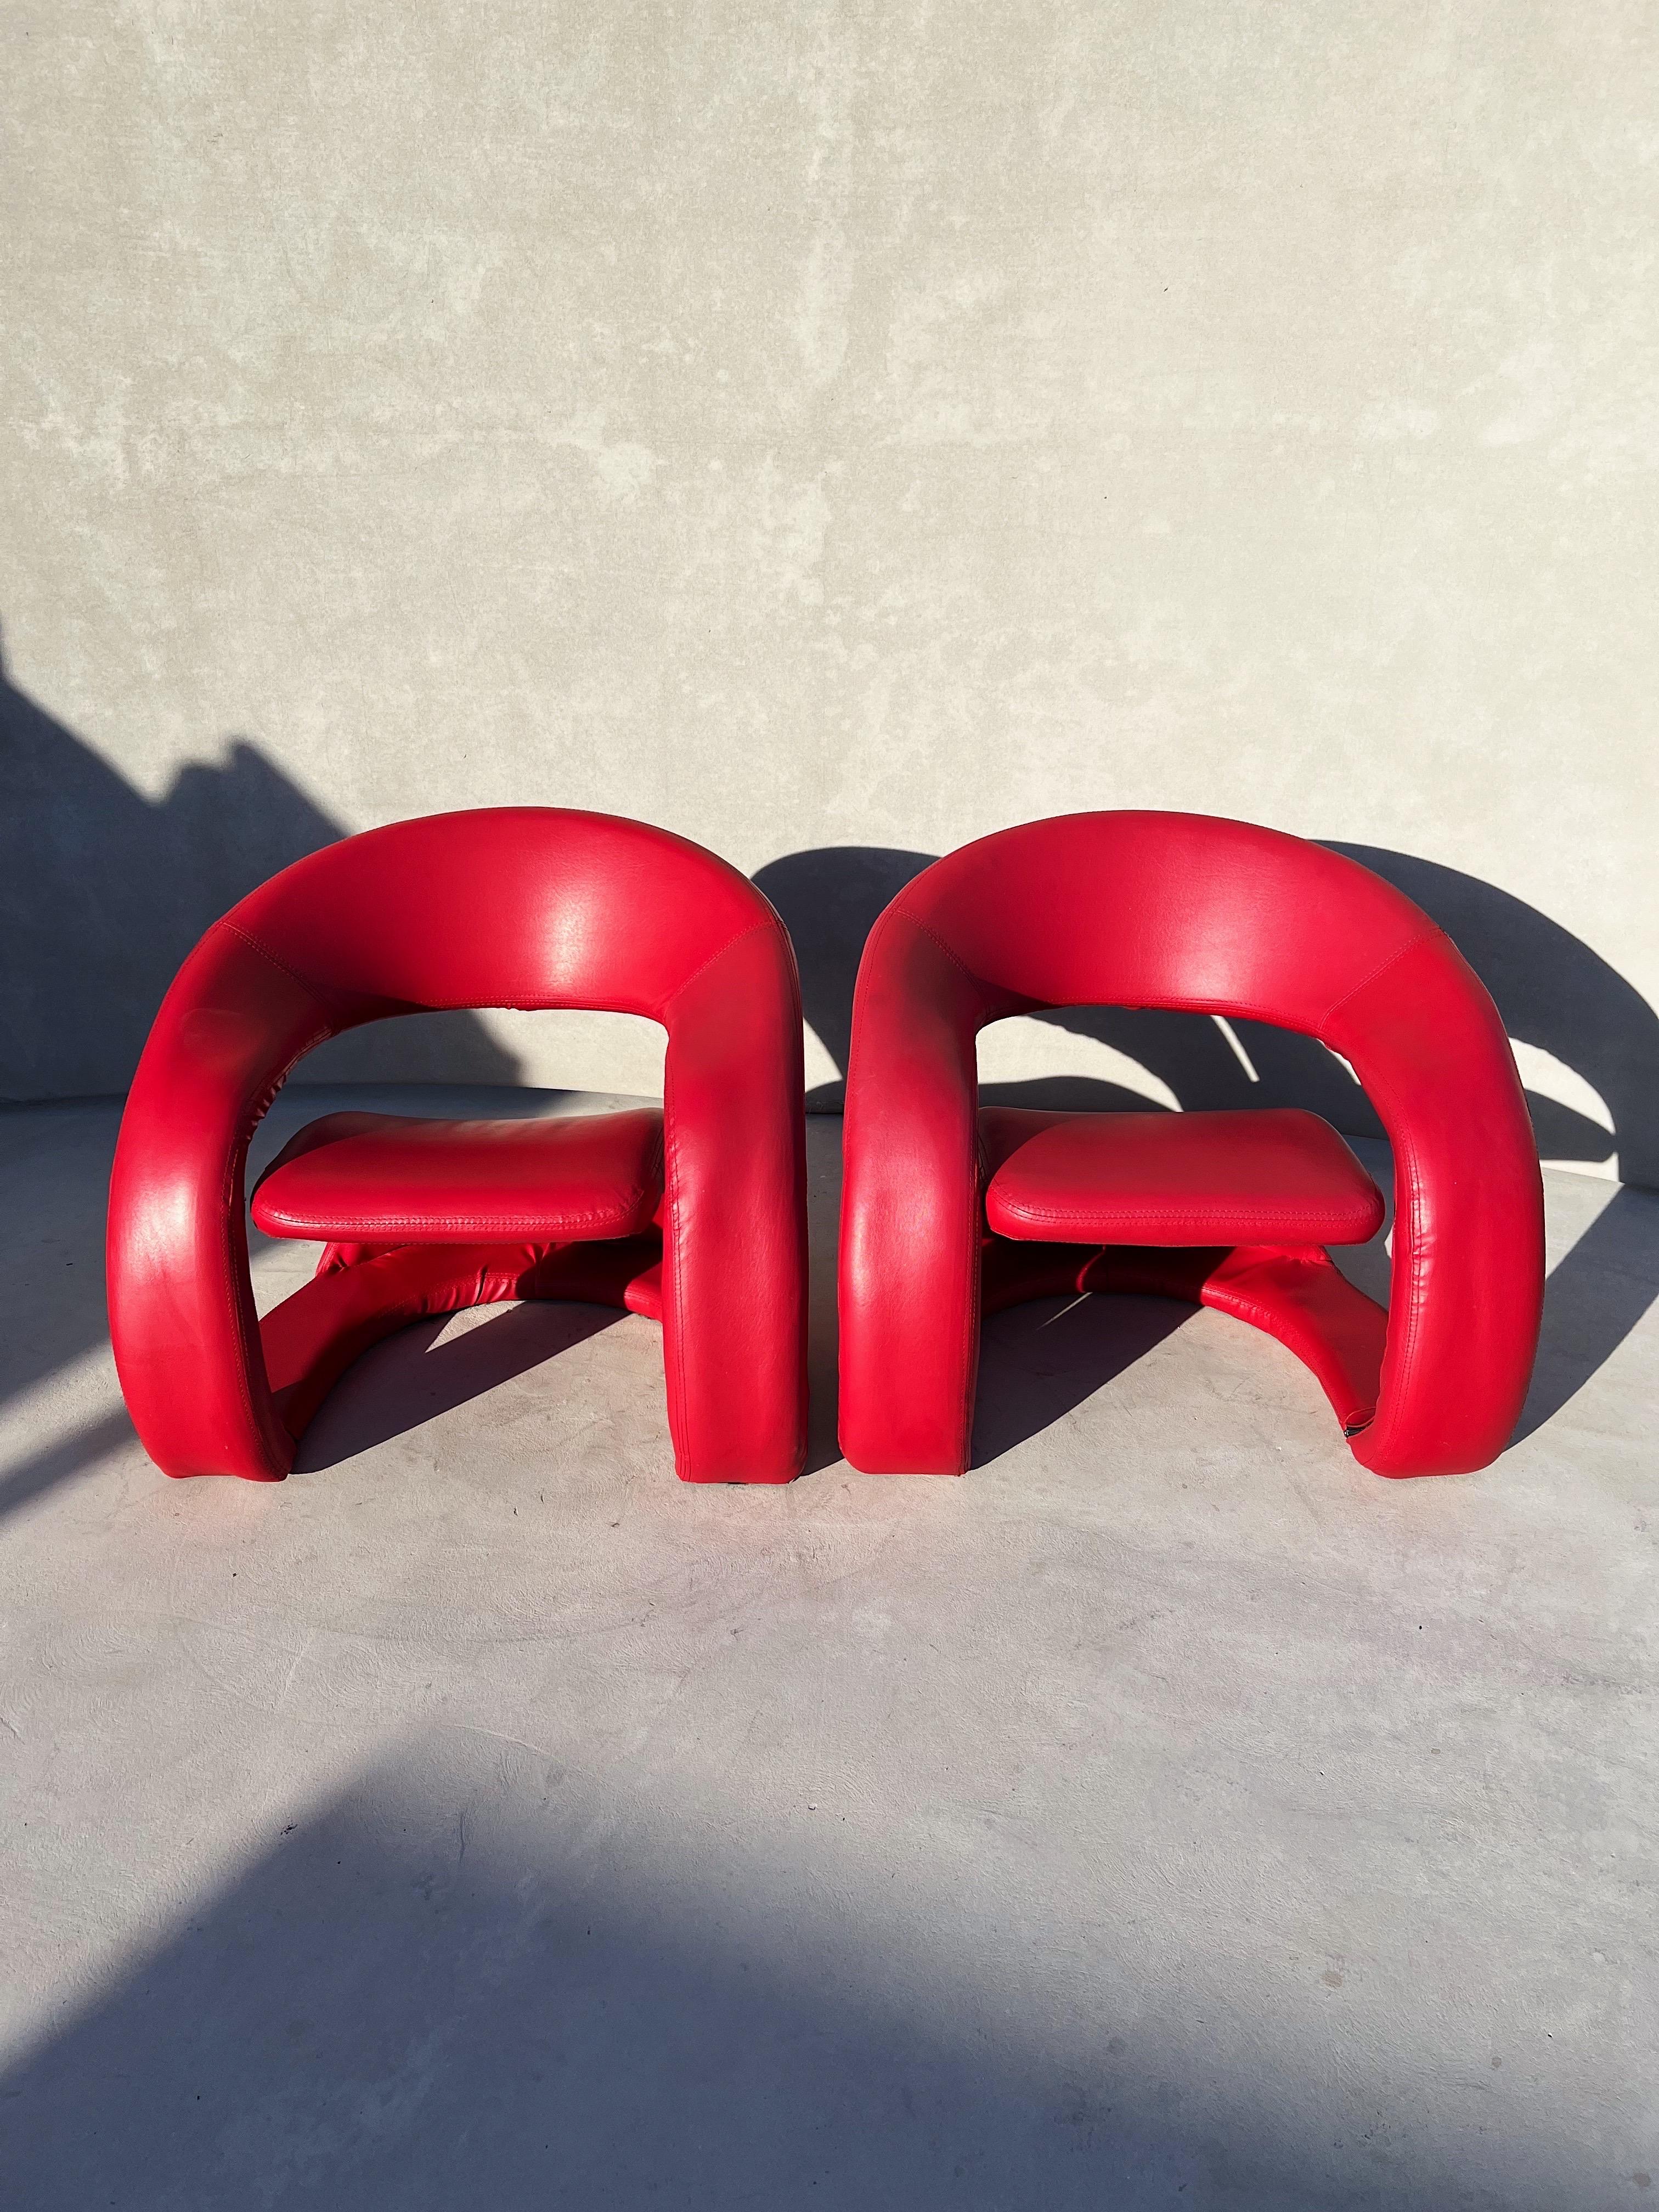 Vintage pair of sculptural chairs in electric red, Attributed to Jaymar

A vintage pair of lounge chairs in a sculpturally eye-pleasing design and form 

These chairs were created sometime in the 1990s, custom made in an electric pop red